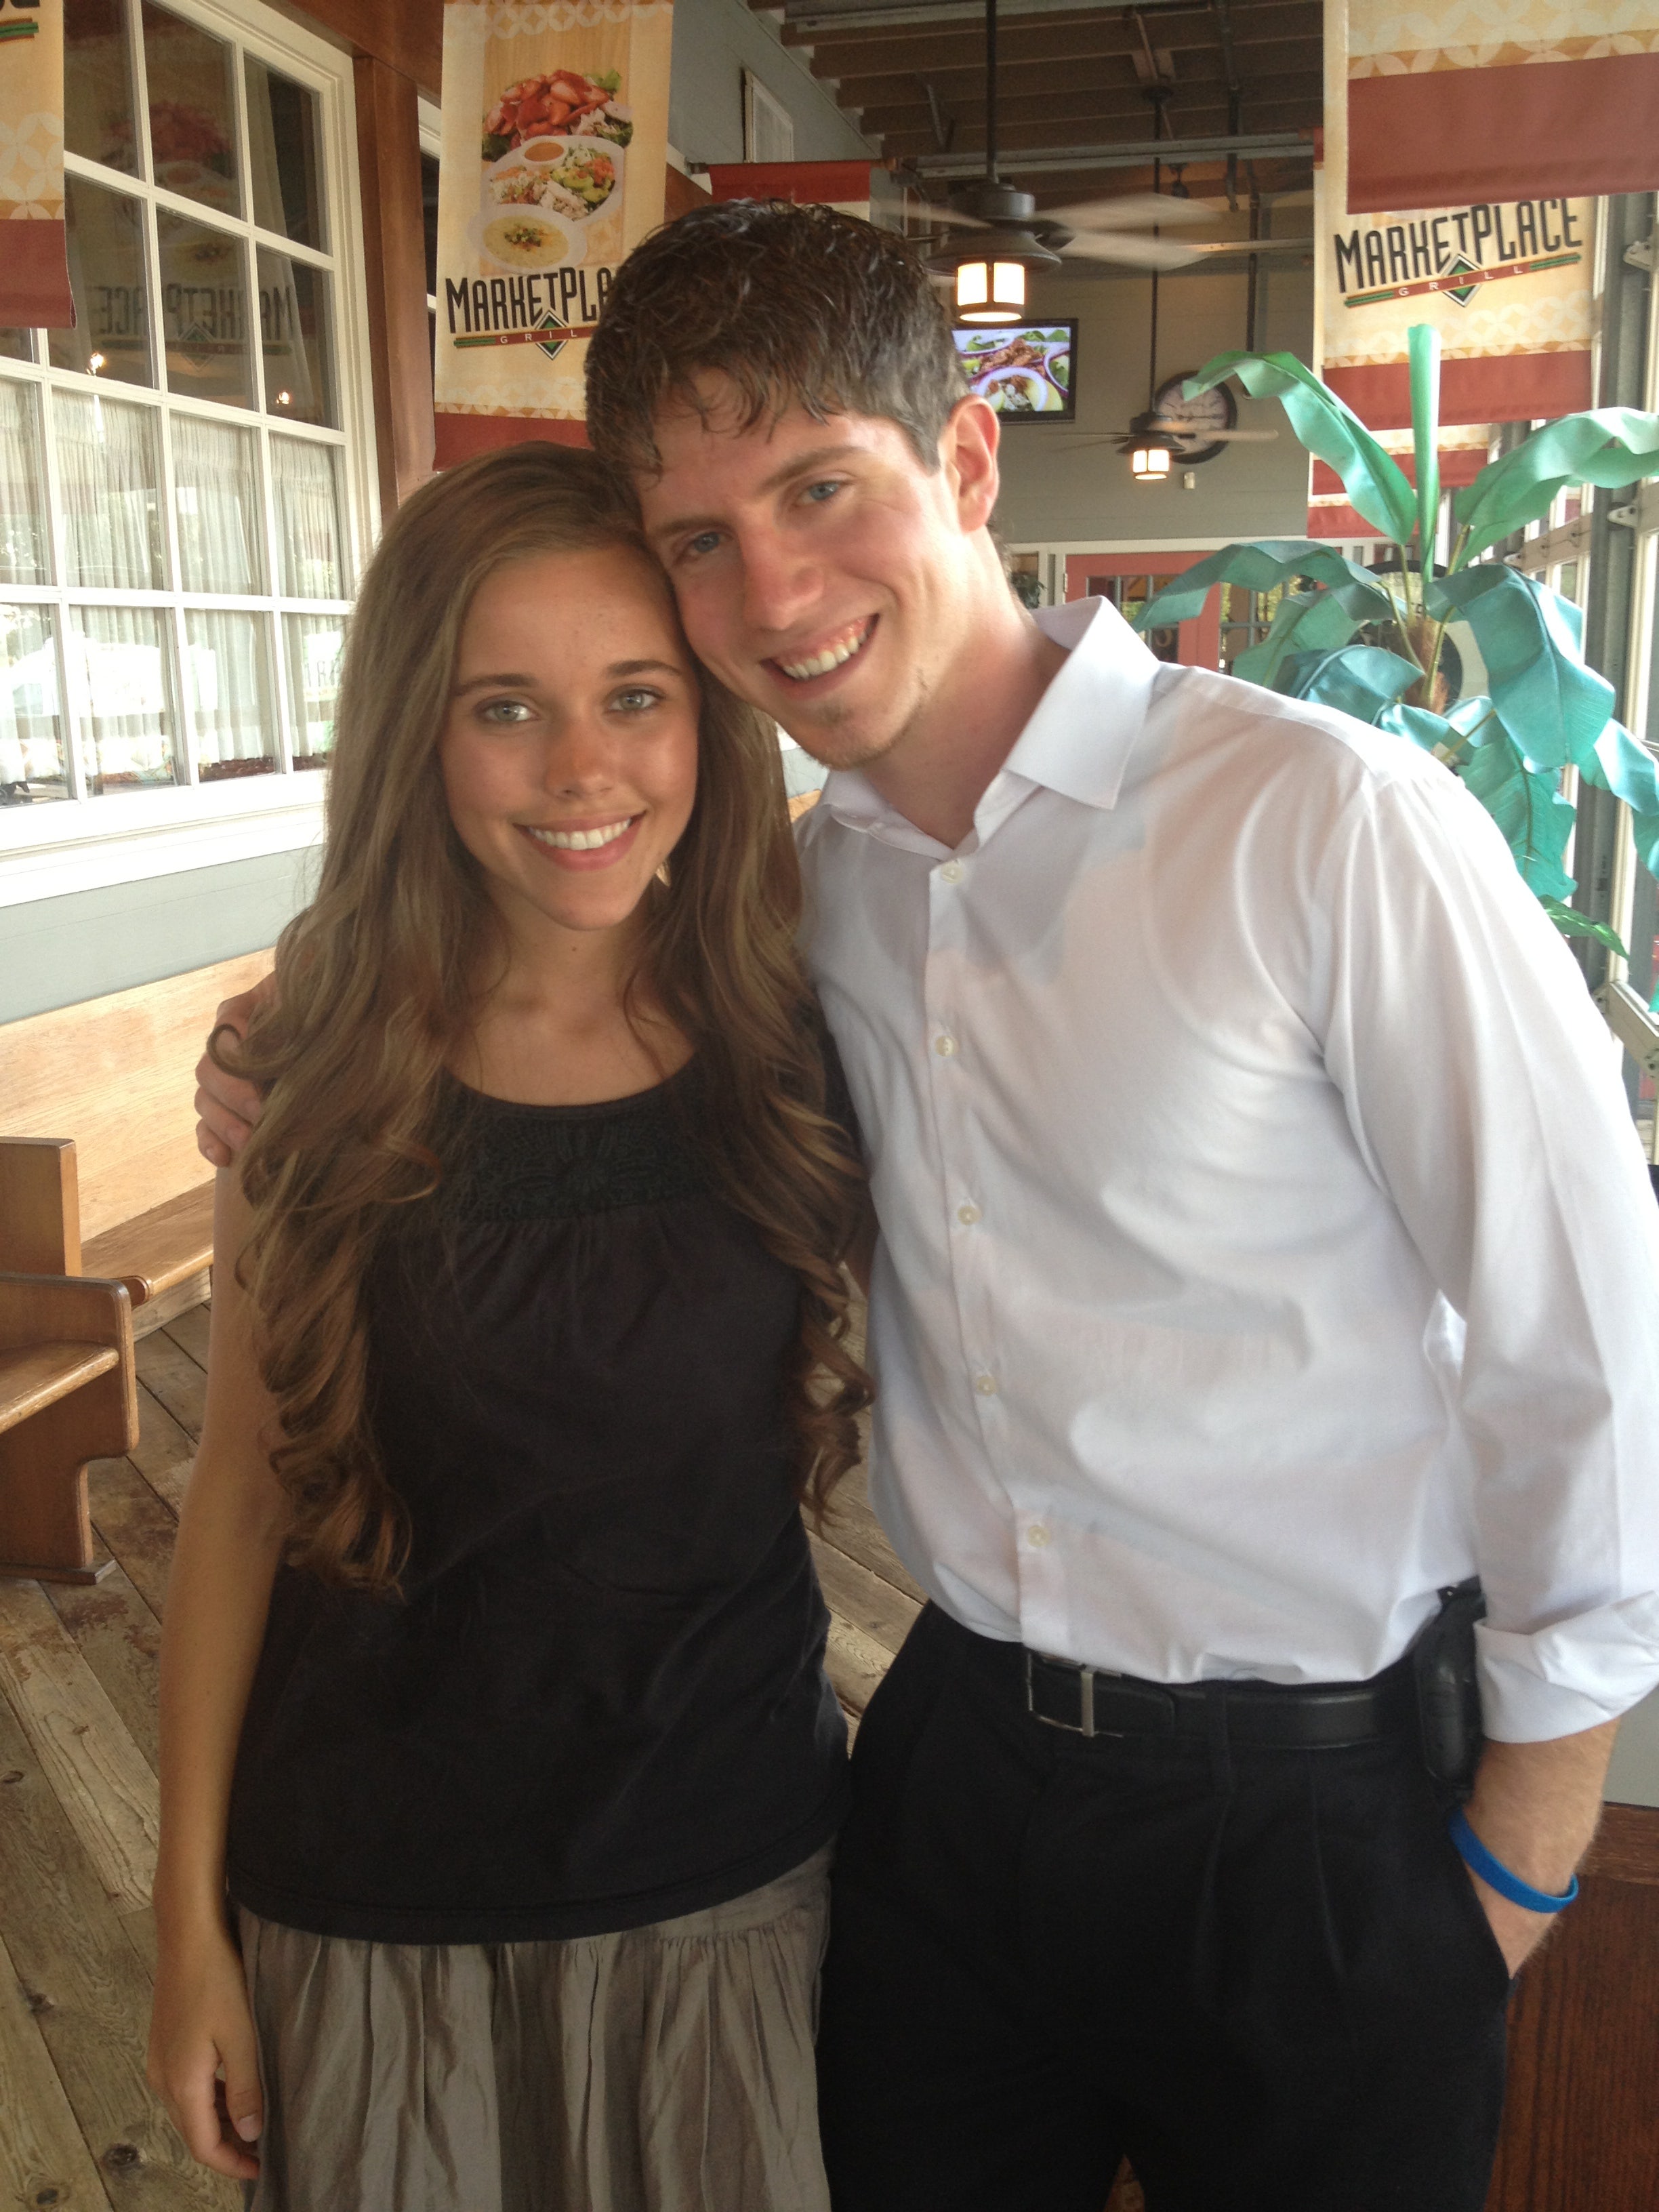 Duggar daughter sparks controversy by posing in picture with gun.